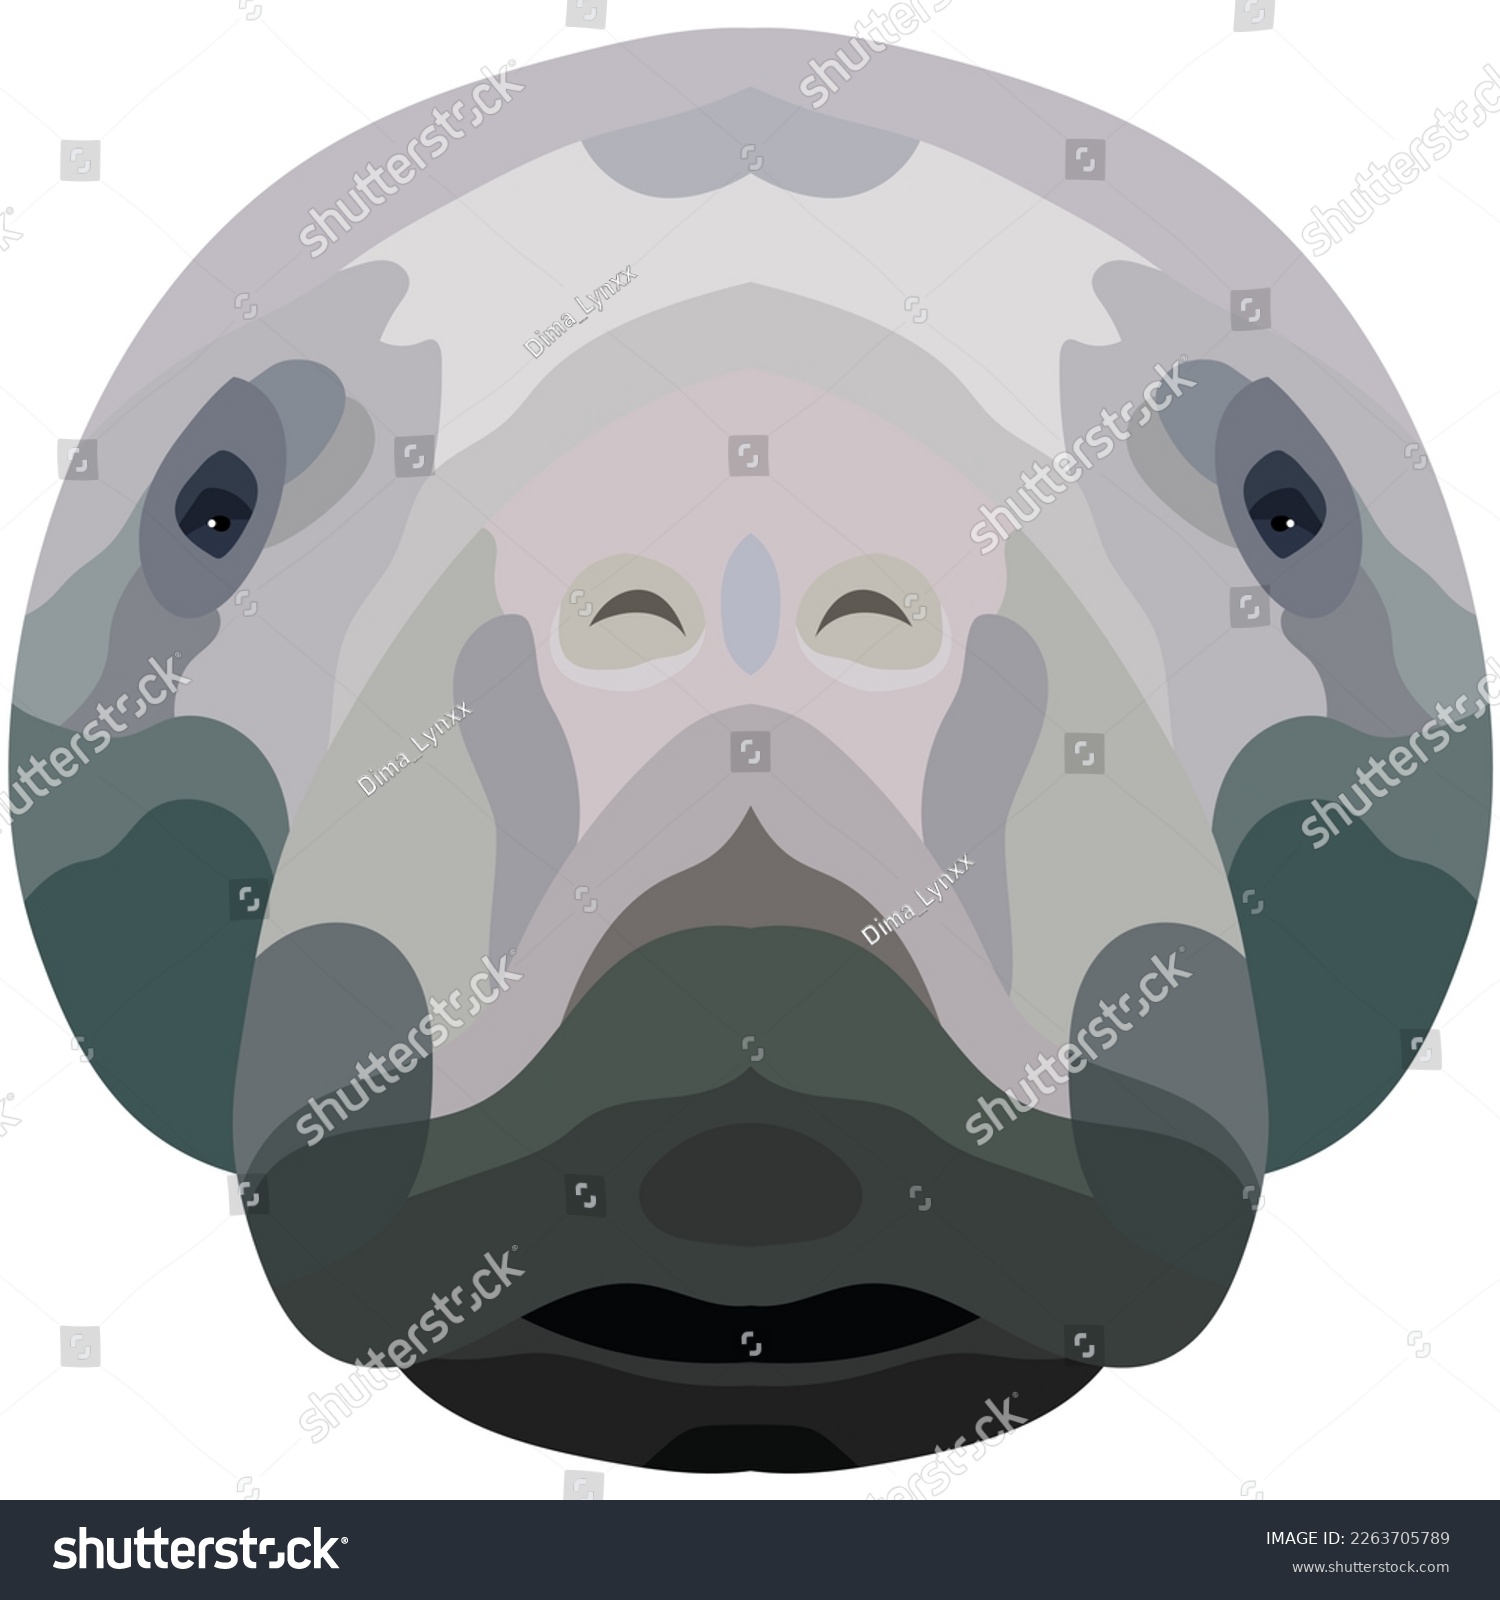 SVG of The face of a manatee. An illustration of the muzzle of a manatee is depicted. Bright portrait on a white background. Vector graphics. animal logo. svg